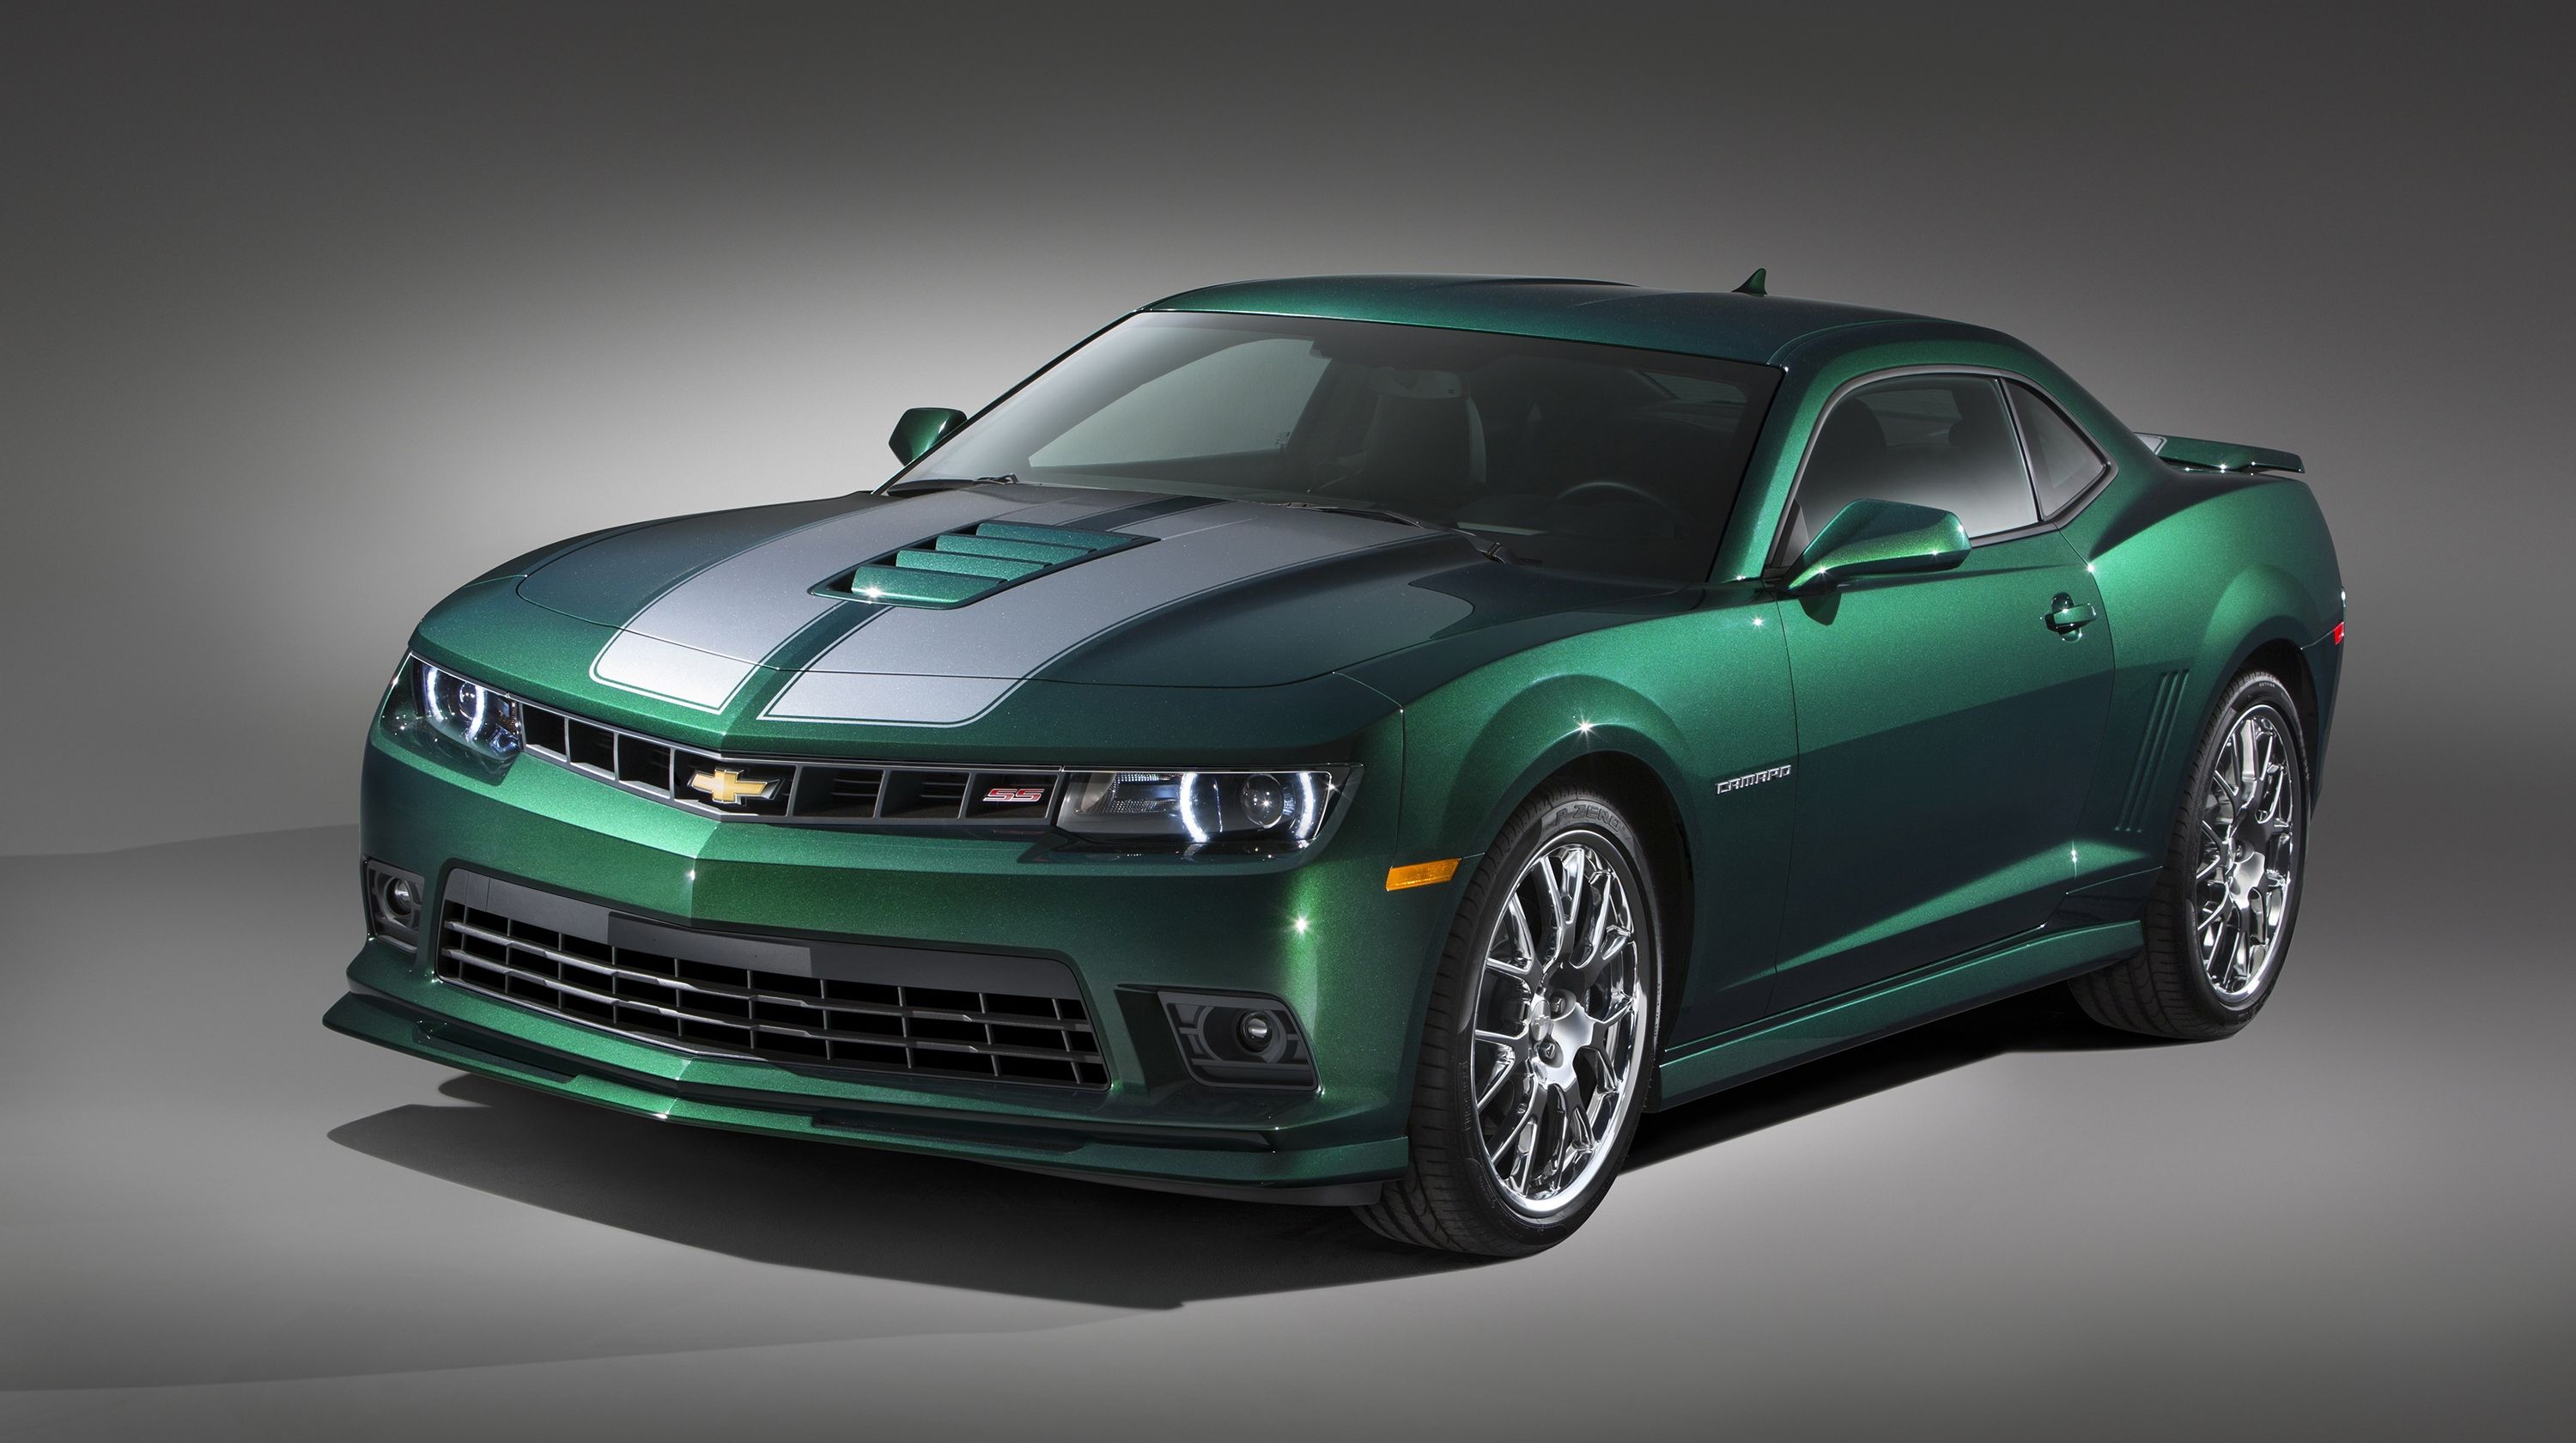  Chevy's releasing a special-edition Camaro SS at SEMA, and it needs you to name it!